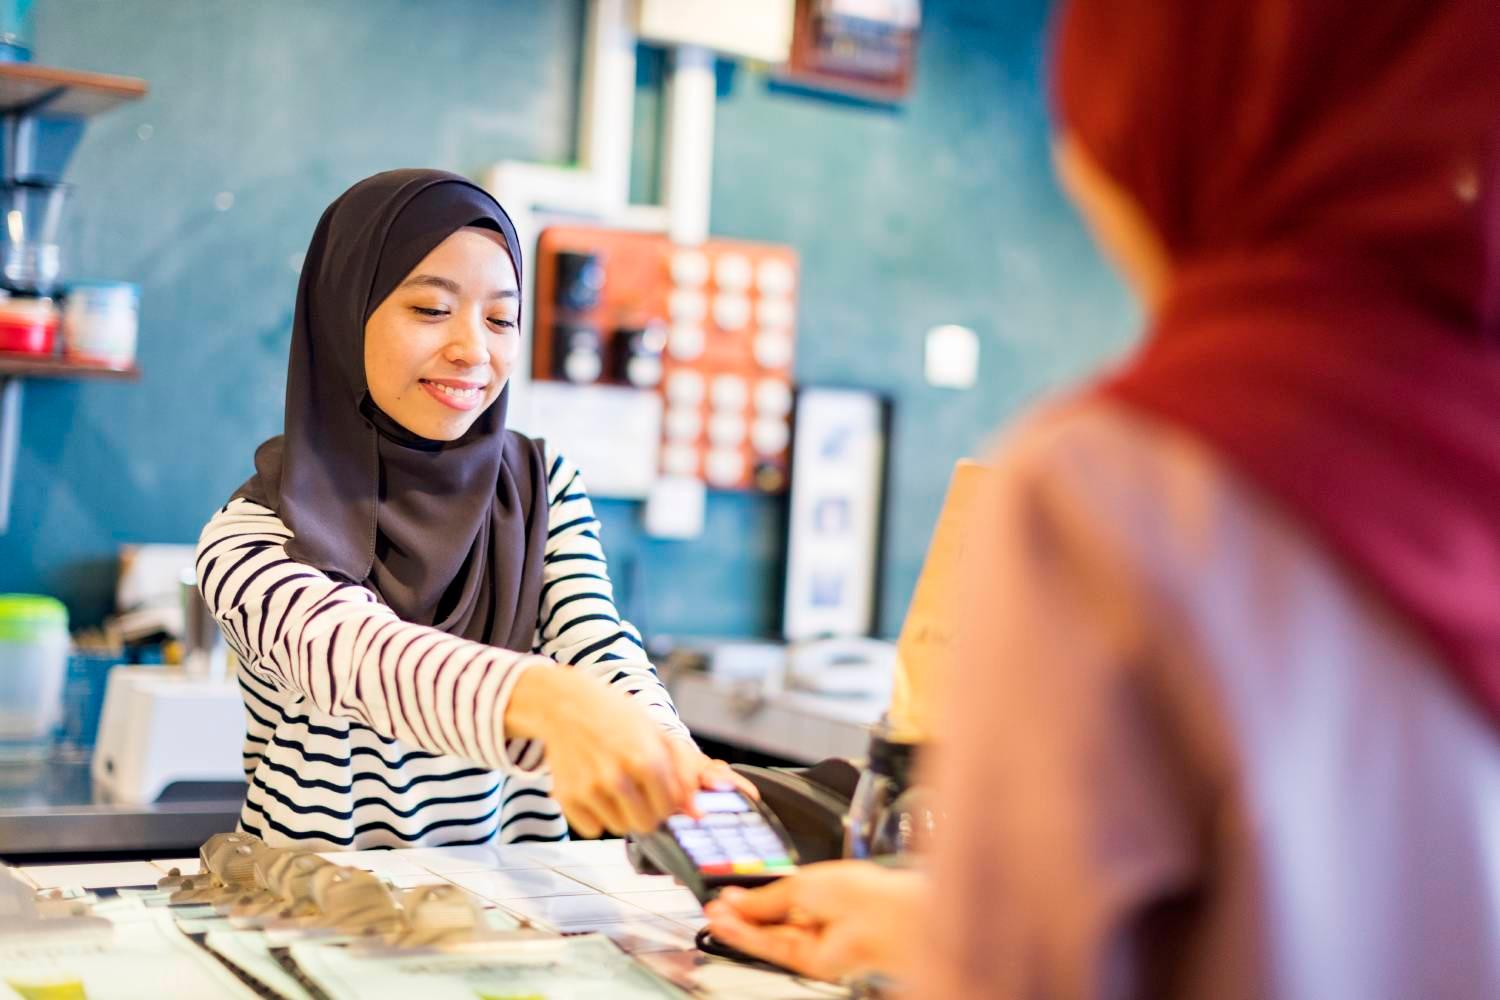 Malaysian woman paying with credit card